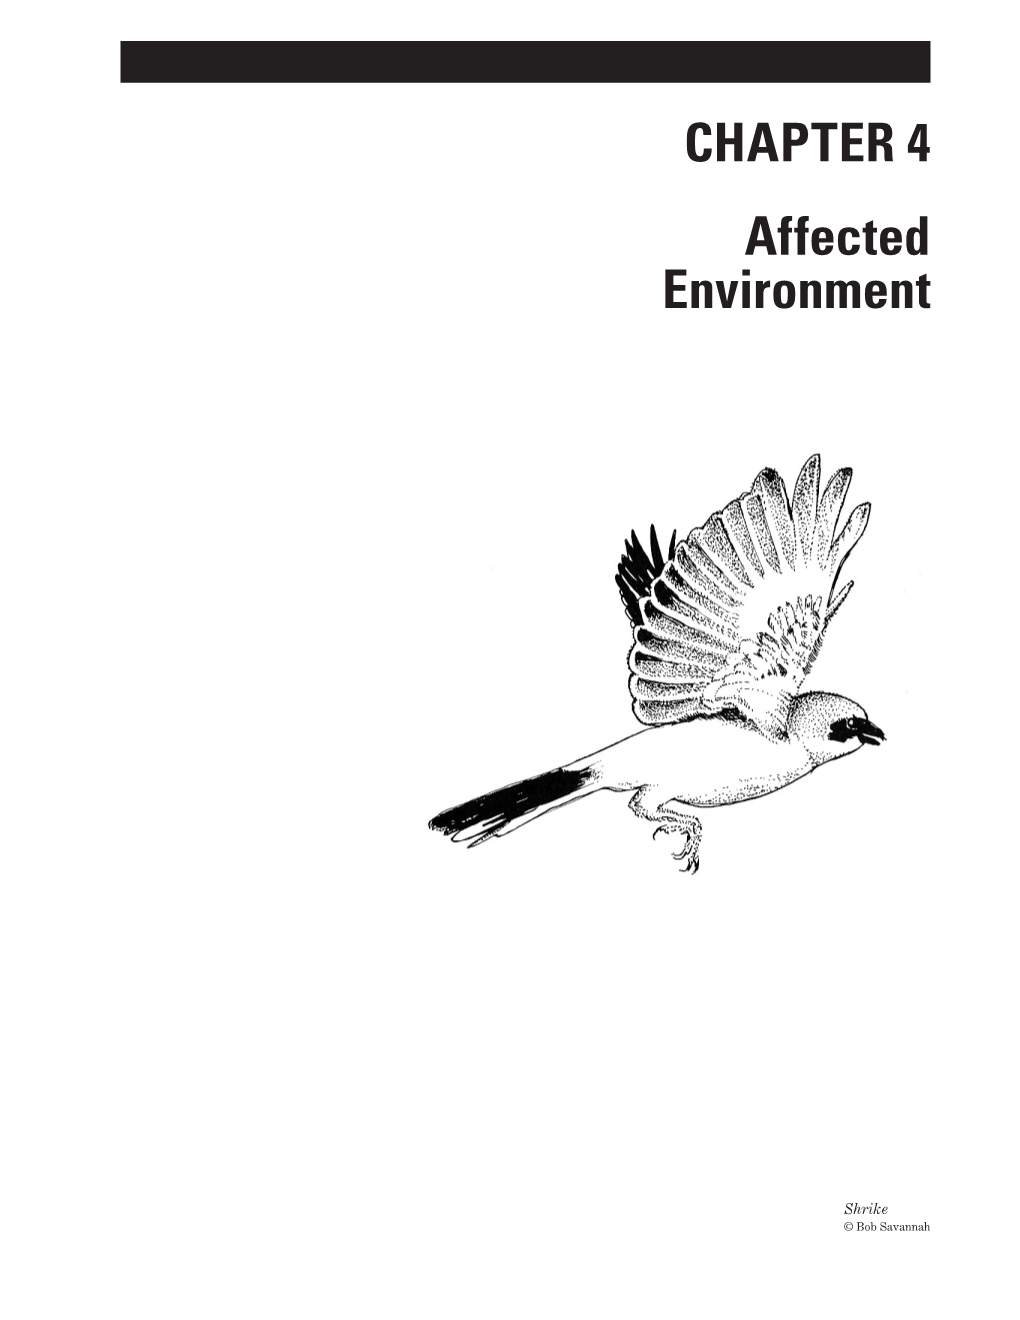 Chapter 4, Affected Environment